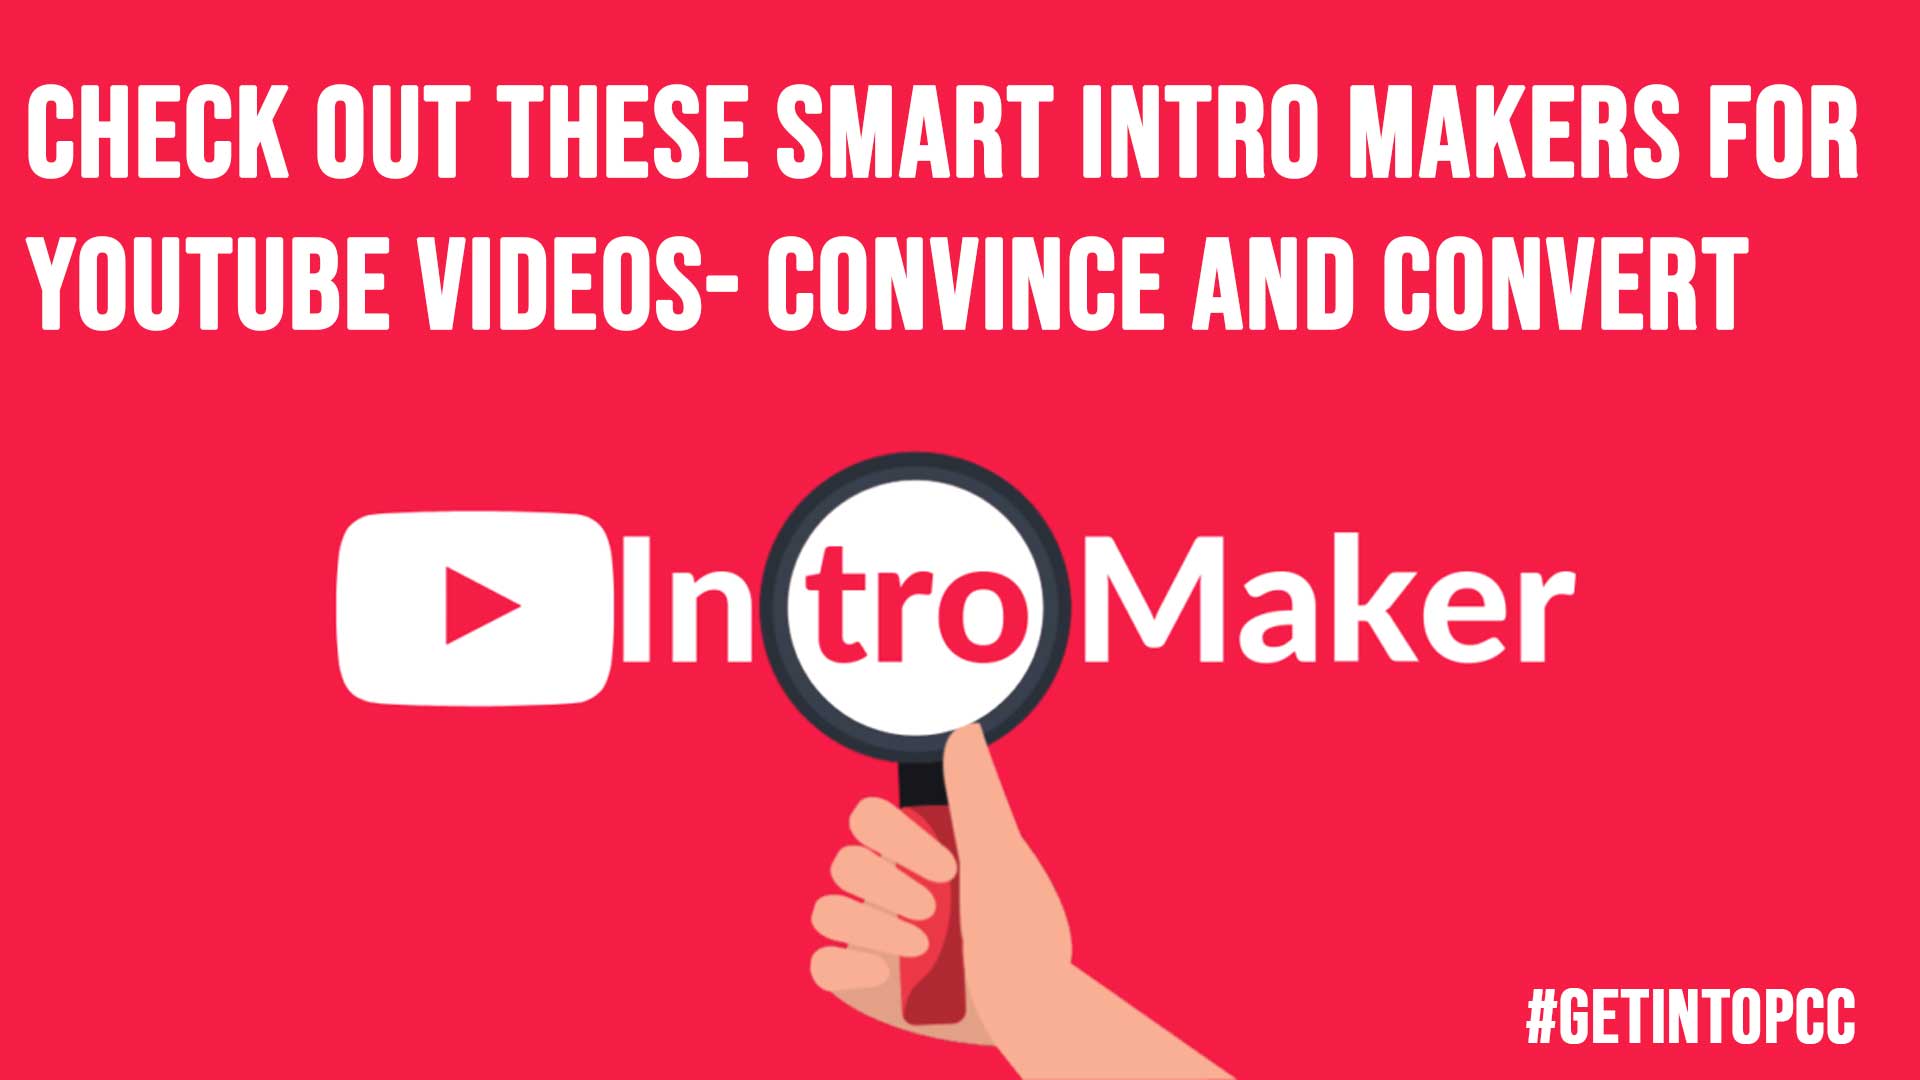 Check Out These Smart Intro Makers for YouTube Videos Convince and Convert